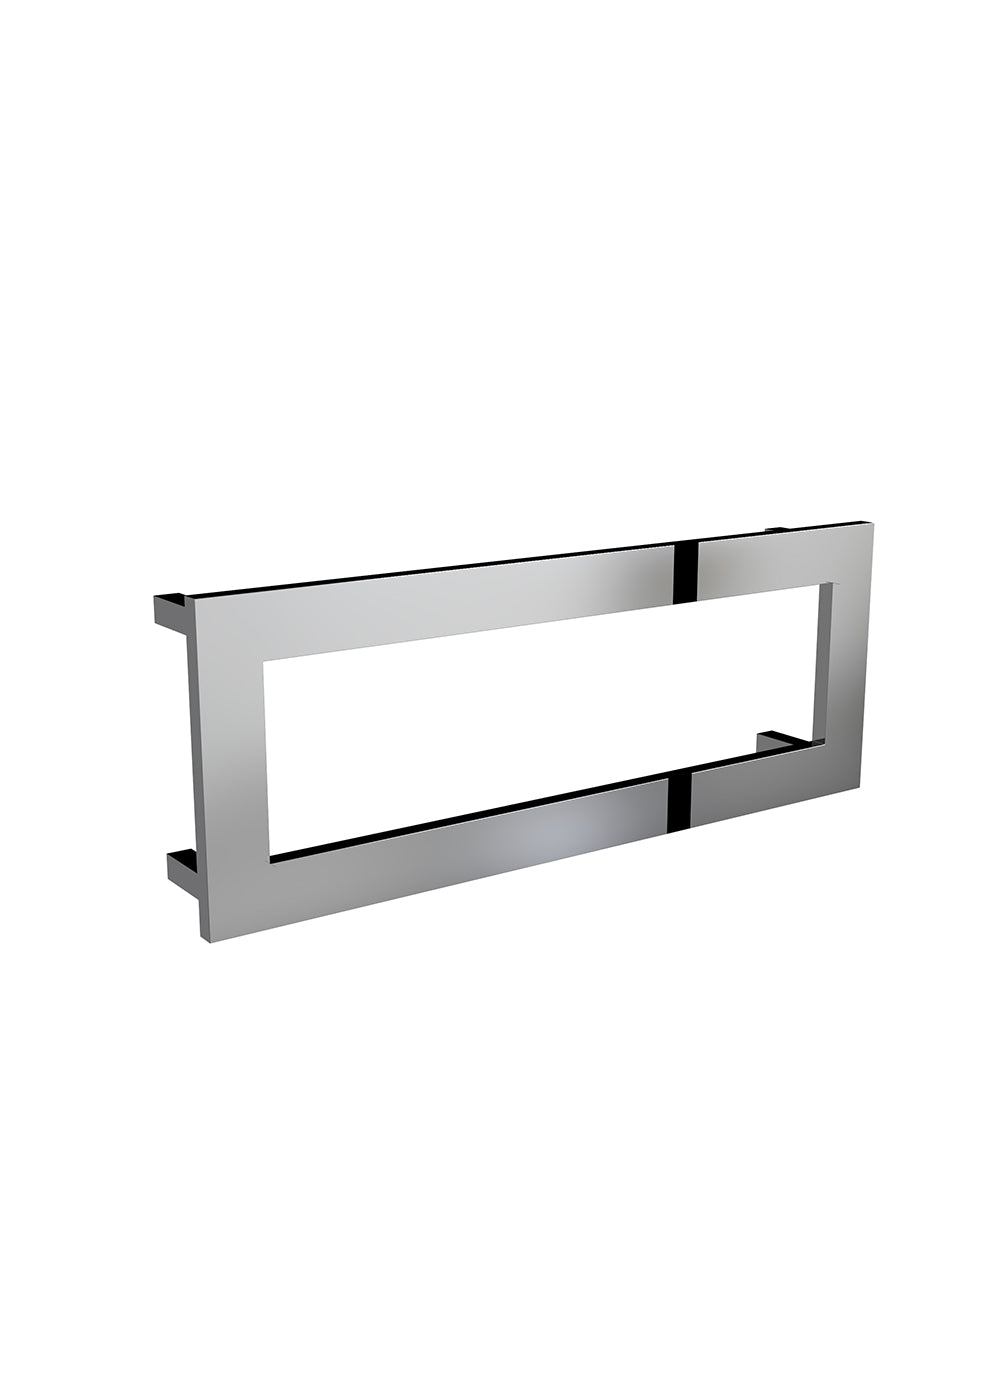 Bivano Stainless Steel Heated Towel Rail - 300mm x 800mm - Polished Stainless Steel